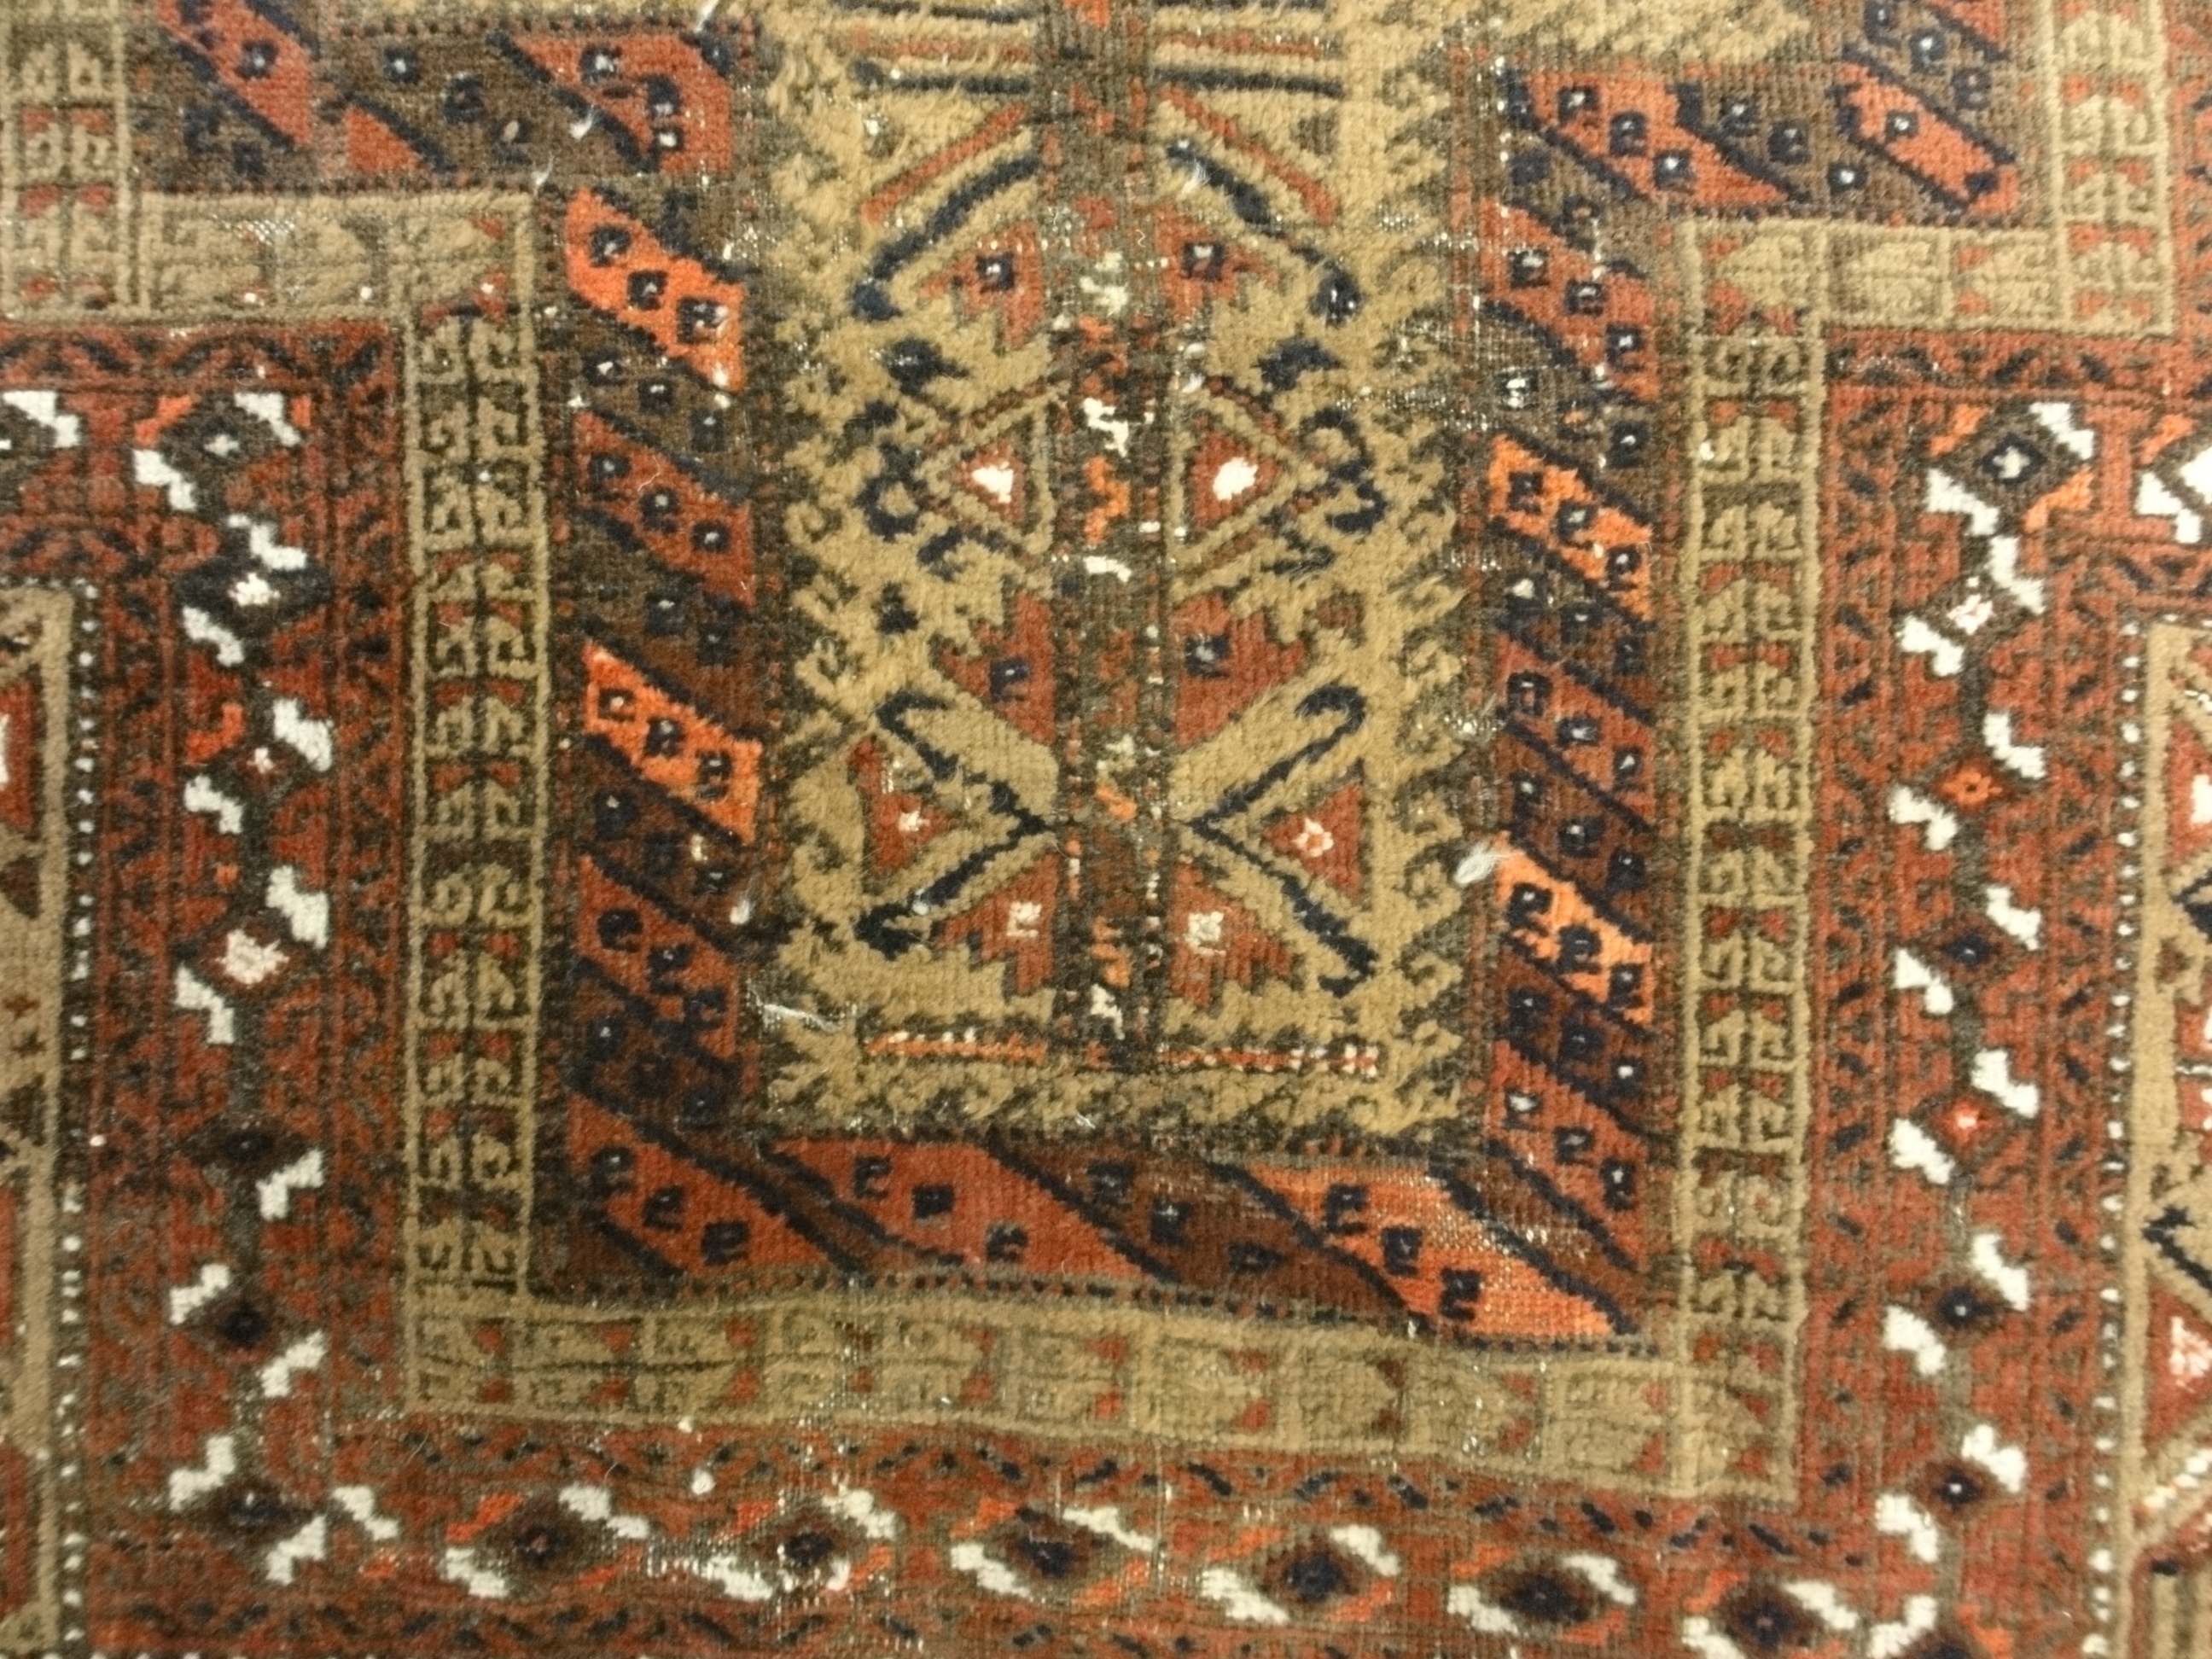 An antique, original Persian Baluch rug. A piece of genuine and authentic carpet art sold at Santa Barbara Design Center. Rugs and More. An antique, original Persian Baluch rug. A piece of genuine and authentic carpet art sold at Santa Barbara Design Center. Rugs and More.